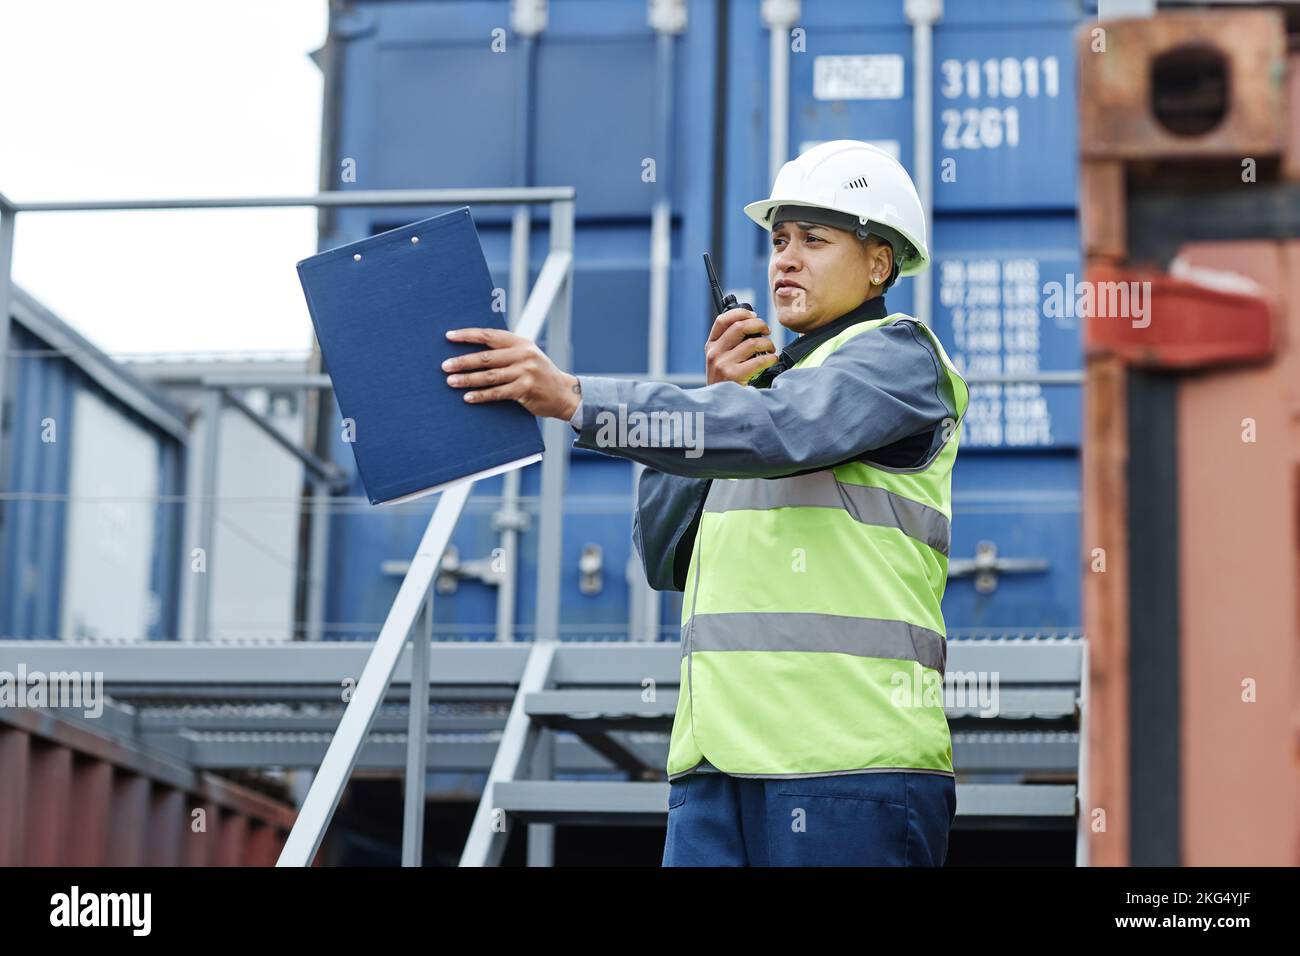 Portrait of female foreman wearing hardhat and speaking to radio while managing operations at shipping dock Stock Photo